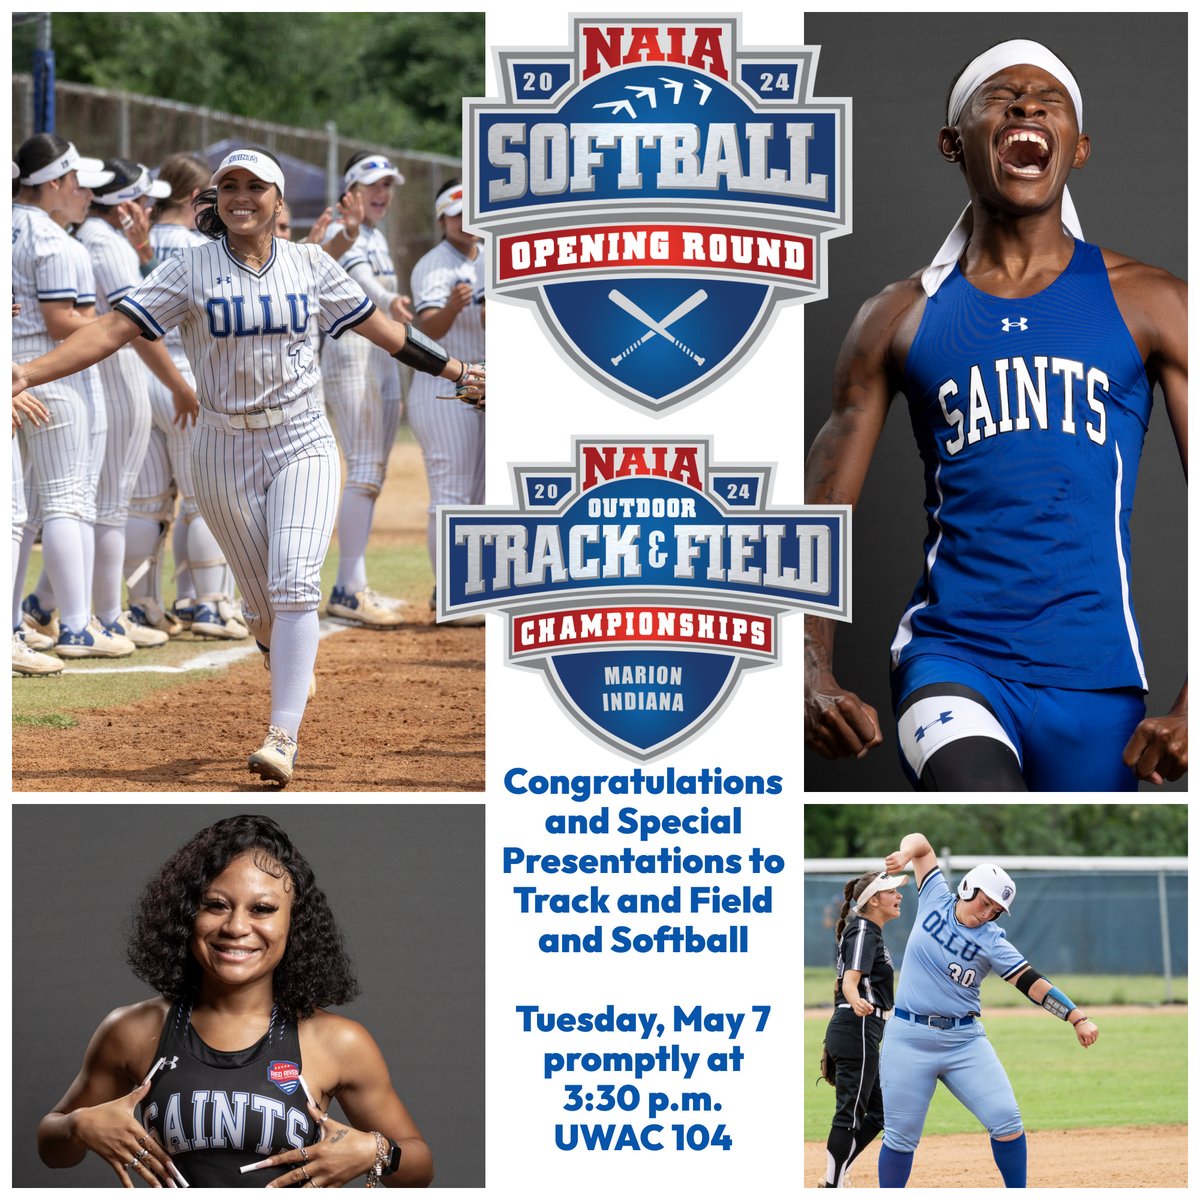 Join us as we congratulate our #OLLUTrackandField members and #OLLUSoftball team for making it to nationals! We will be making a special presentation, so don't miss it! #WingsUpSaints